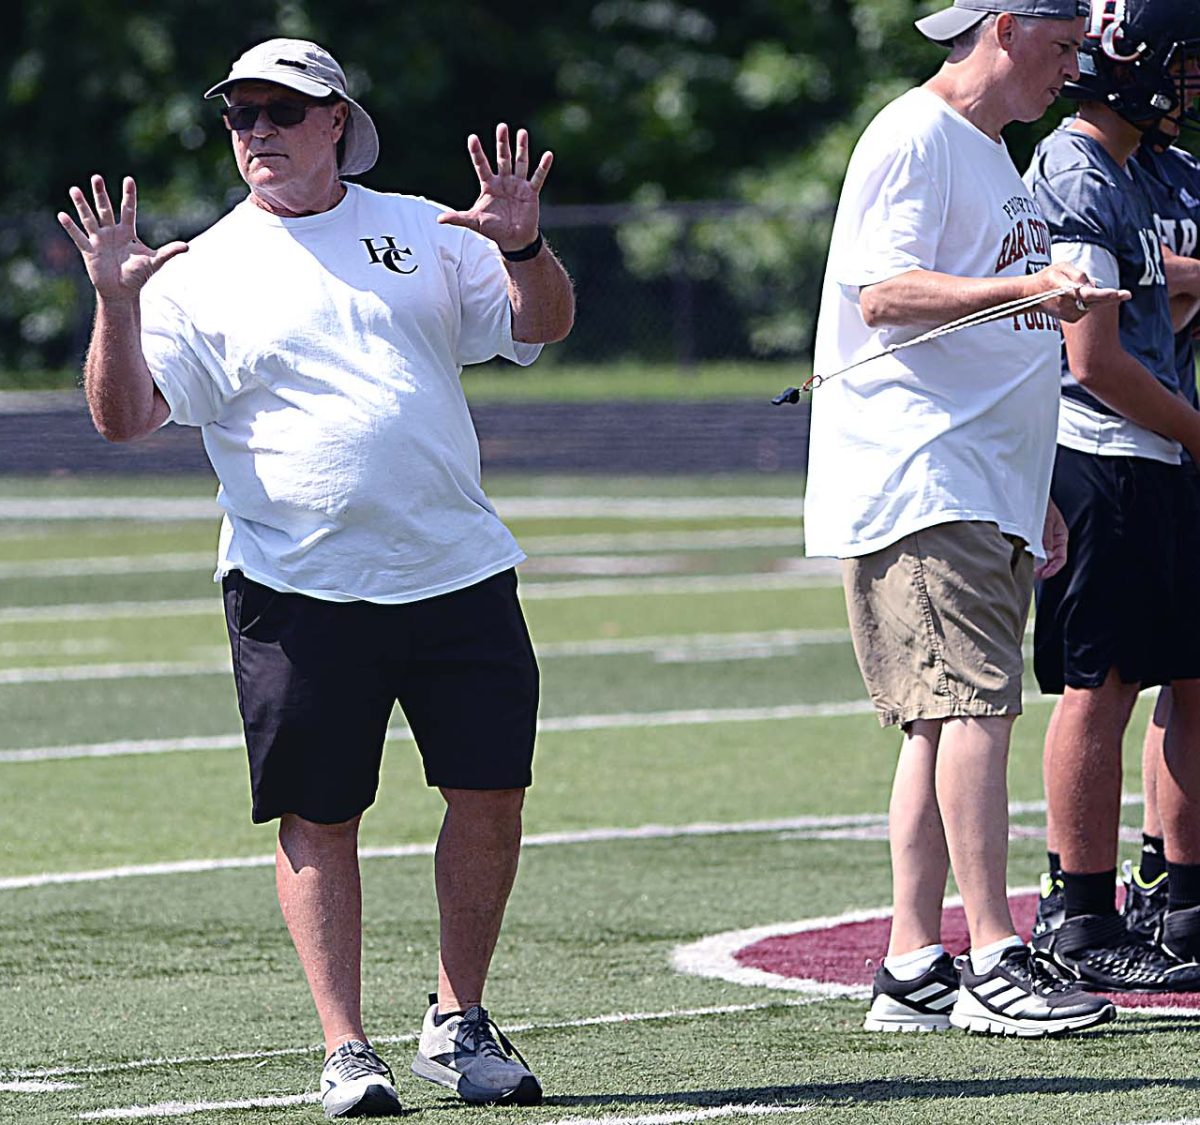 Amos McCreary confirmed Wednesday that he has stepped down as football coach at Harlan County High School after three years.